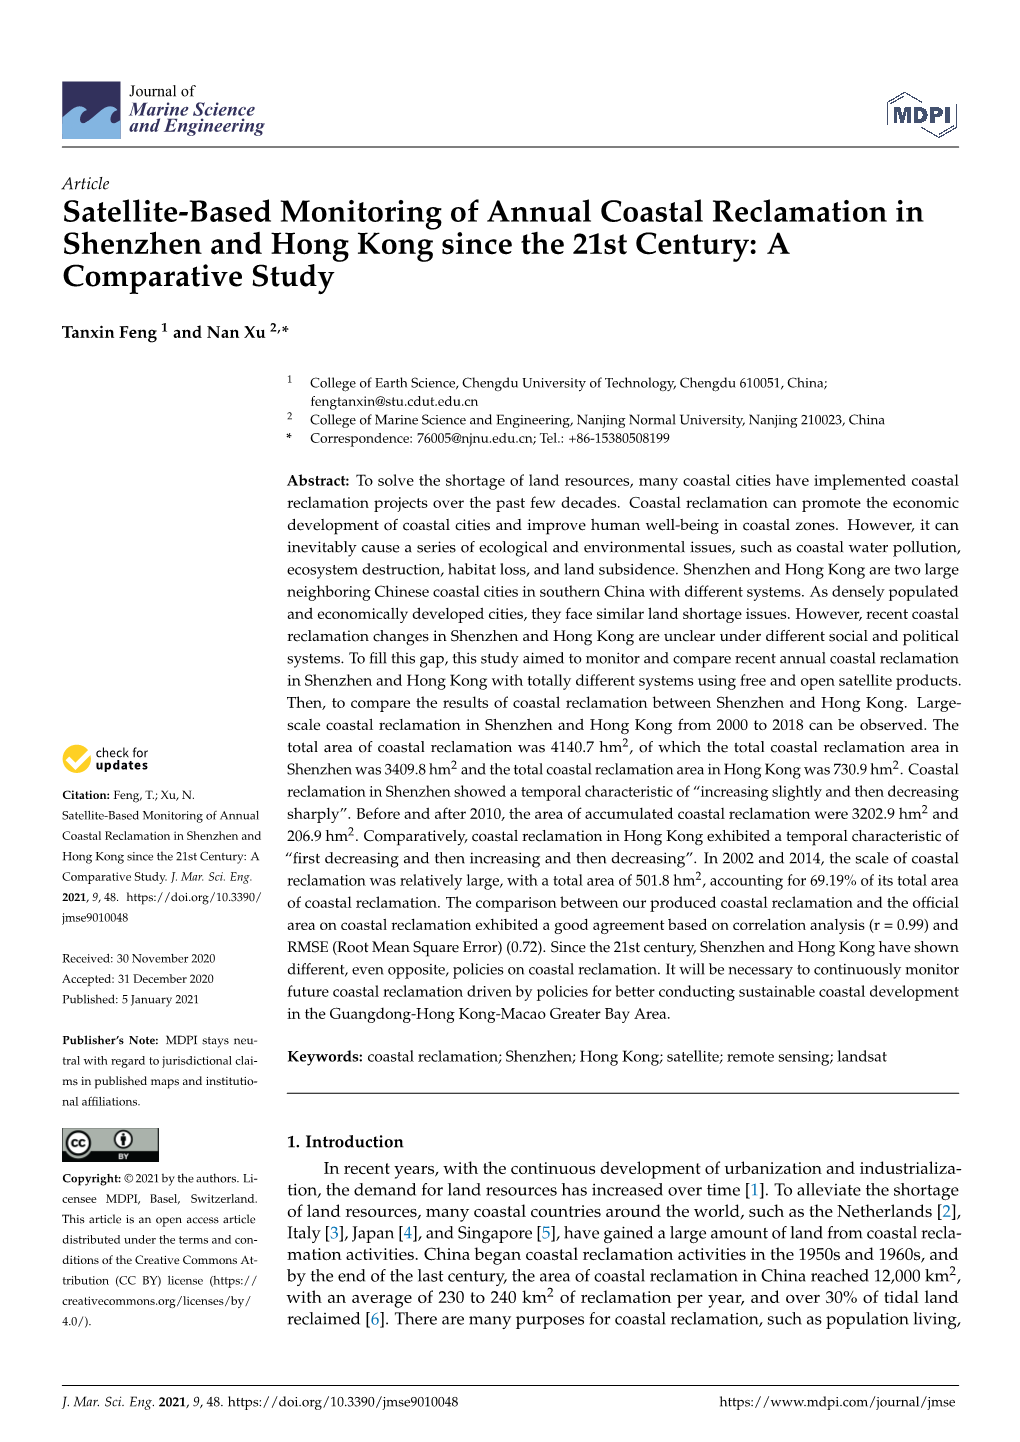 Satellite-Based Monitoring of Annual Coastal Reclamation in Shenzhen and Hong Kong Since the 21St Century: a Comparative Study